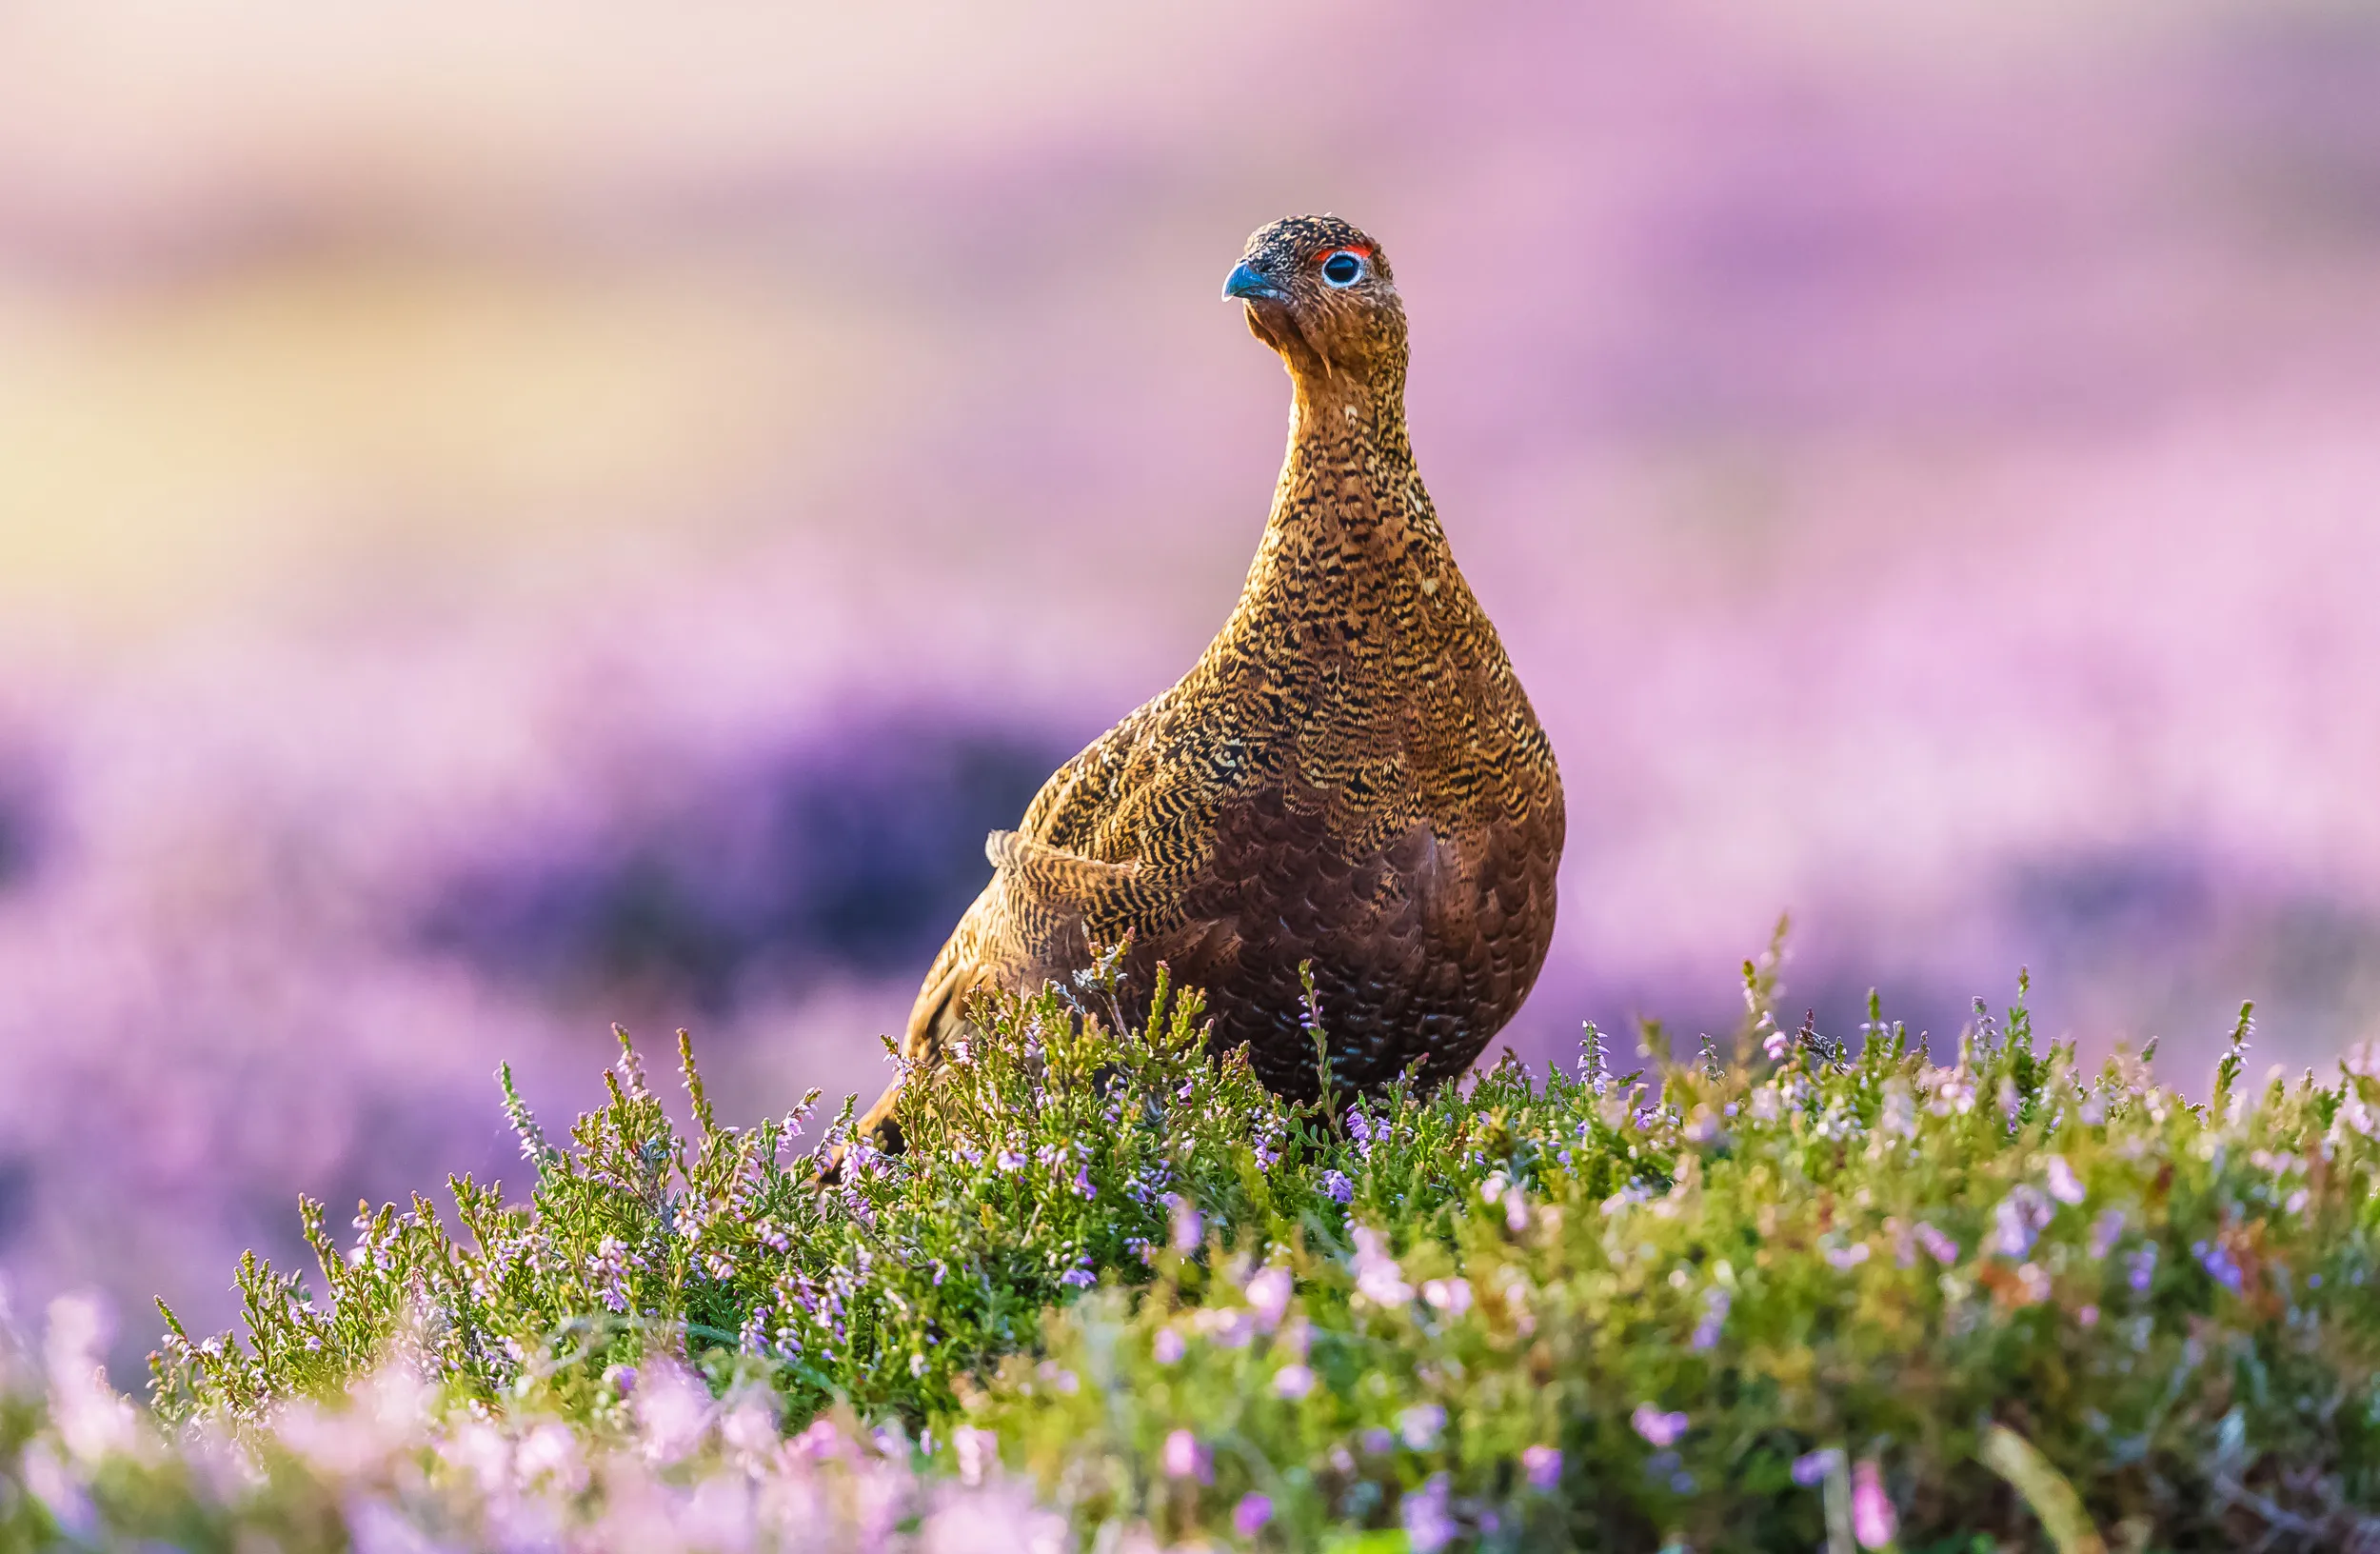 A lone Red Grouse stood on a field of purple heather.